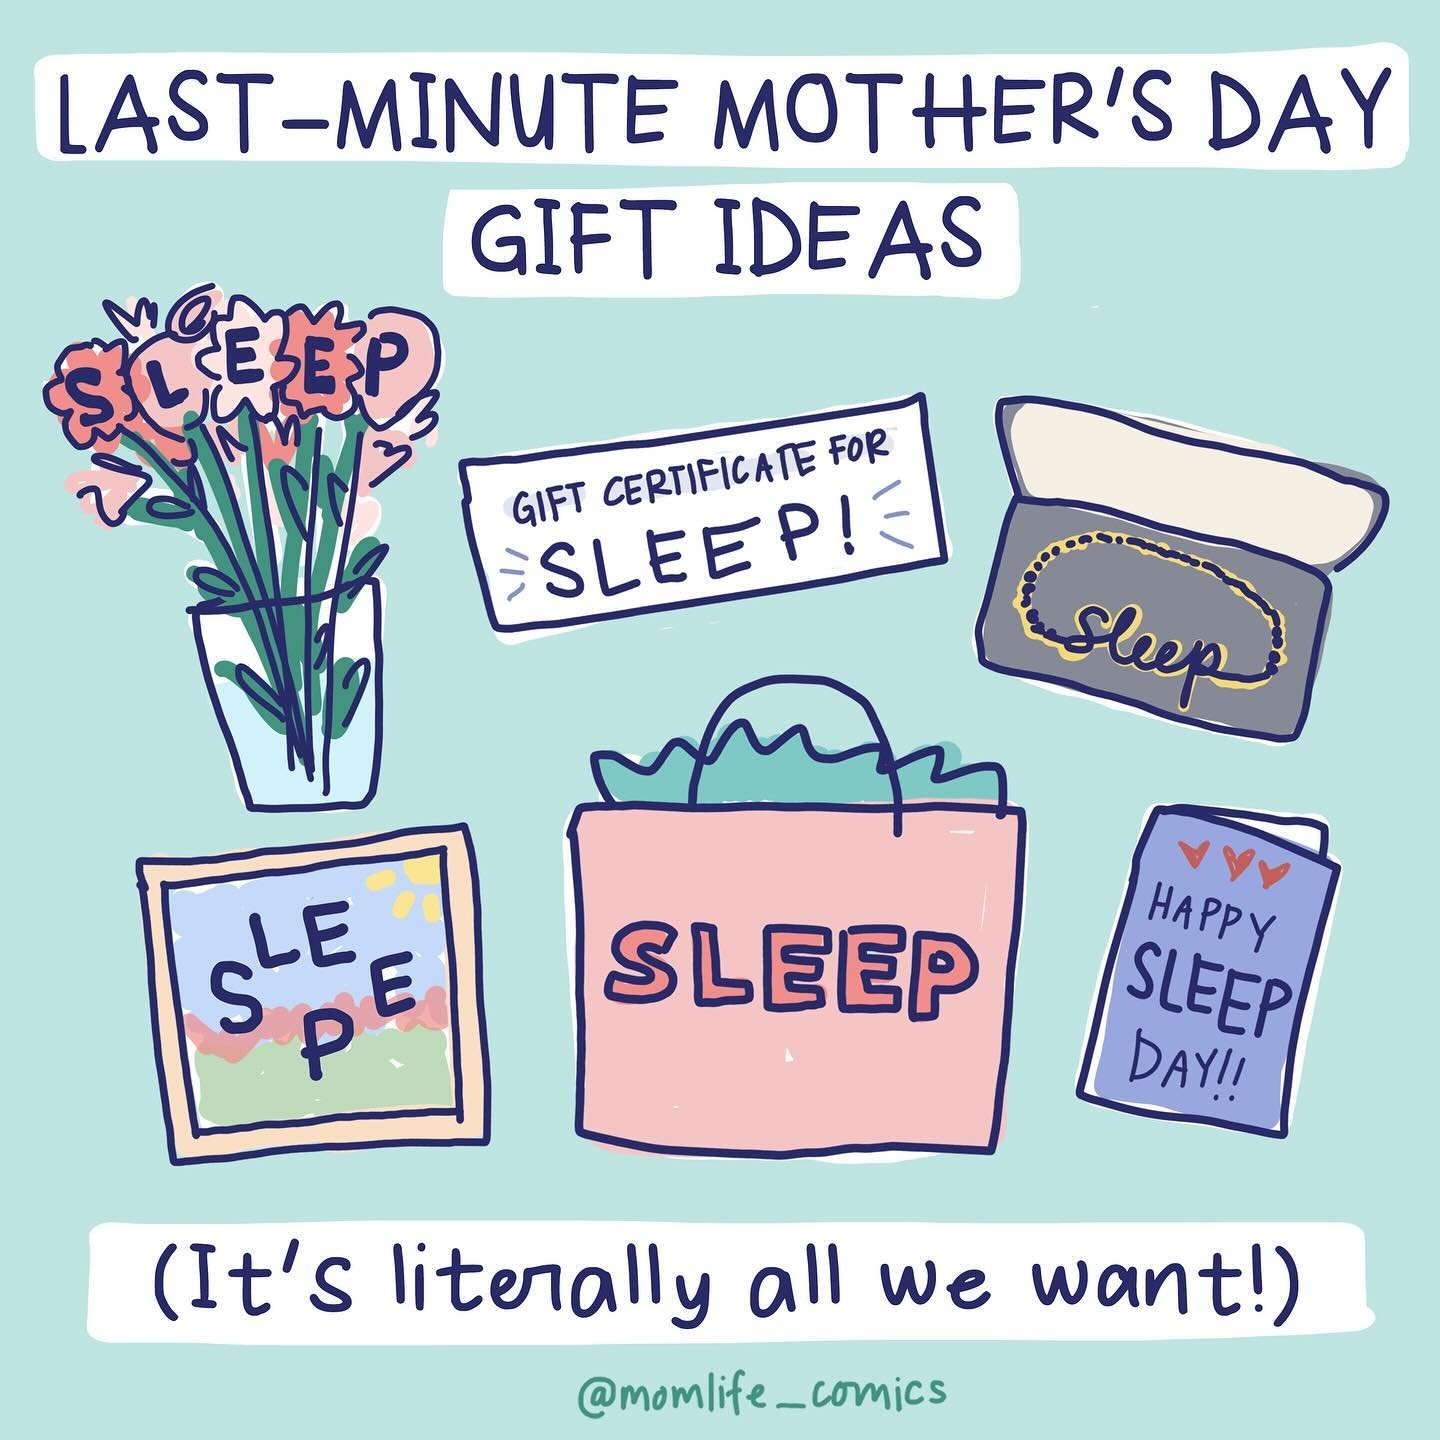 A few [random] old comics in honor of Mother&rsquo;s Day this weekend 😴🥴

👉What do you have planned on Sunday? I&rsquo;m taking a fitness class in the morning + then having brunch at @westendhyannis with some mom friends. I will be spending the af